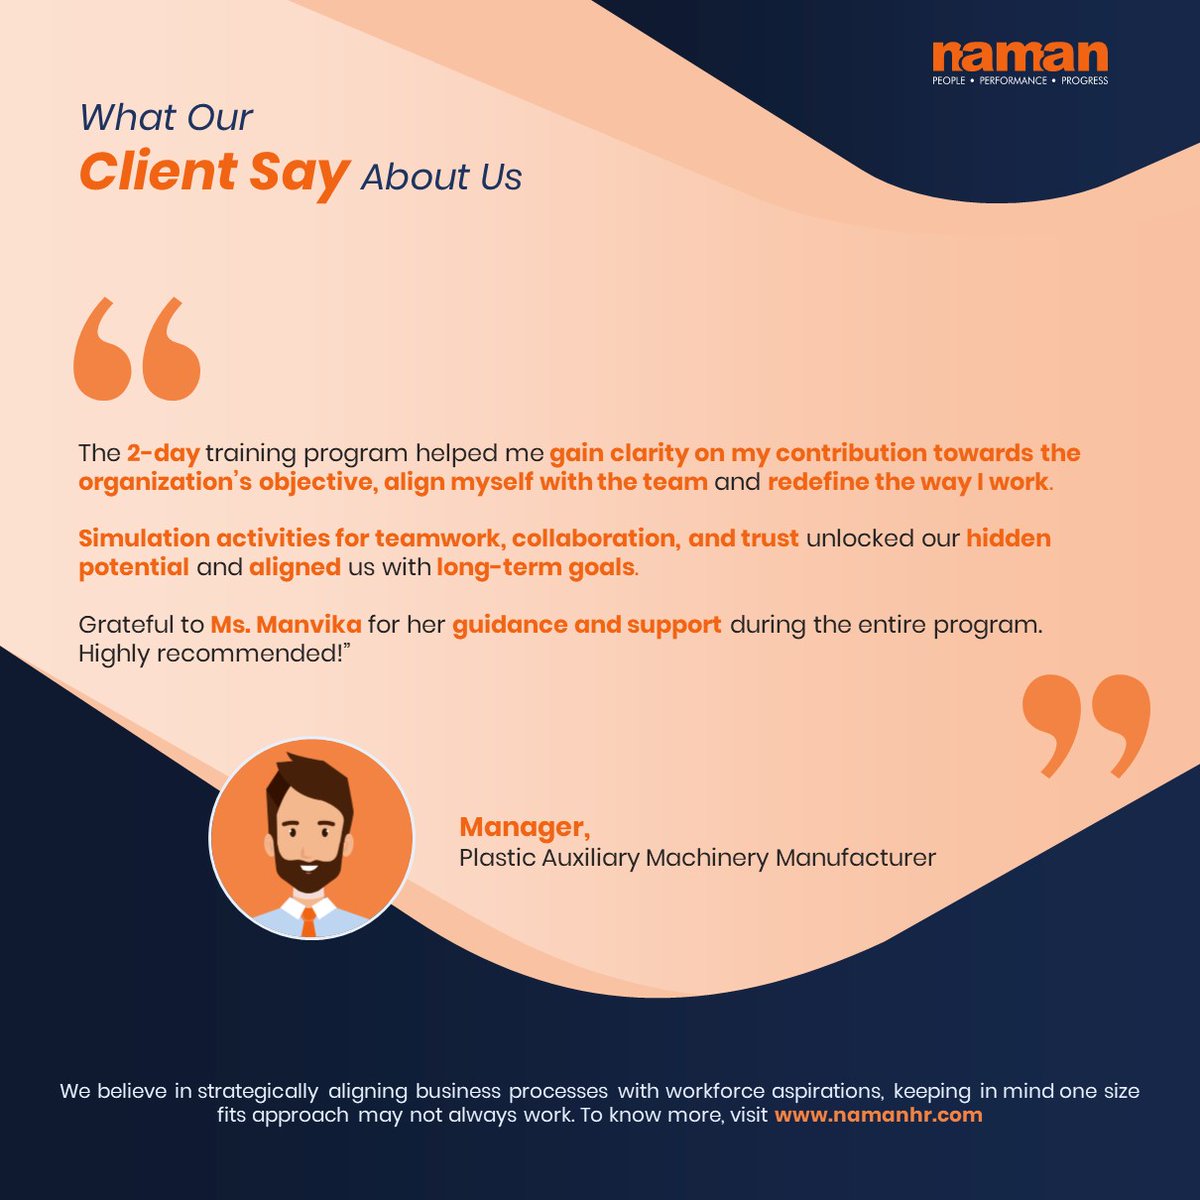 Our recent collaborating with a prominent Plastic Auxiliary Machinery Manufacturer led them to unlock new possibilities, identify thrust areas, & foster #teamsynergy at their 2-day #Strategy Meet. Read on for an insightful testimonial & to know more visit: namanhr.com